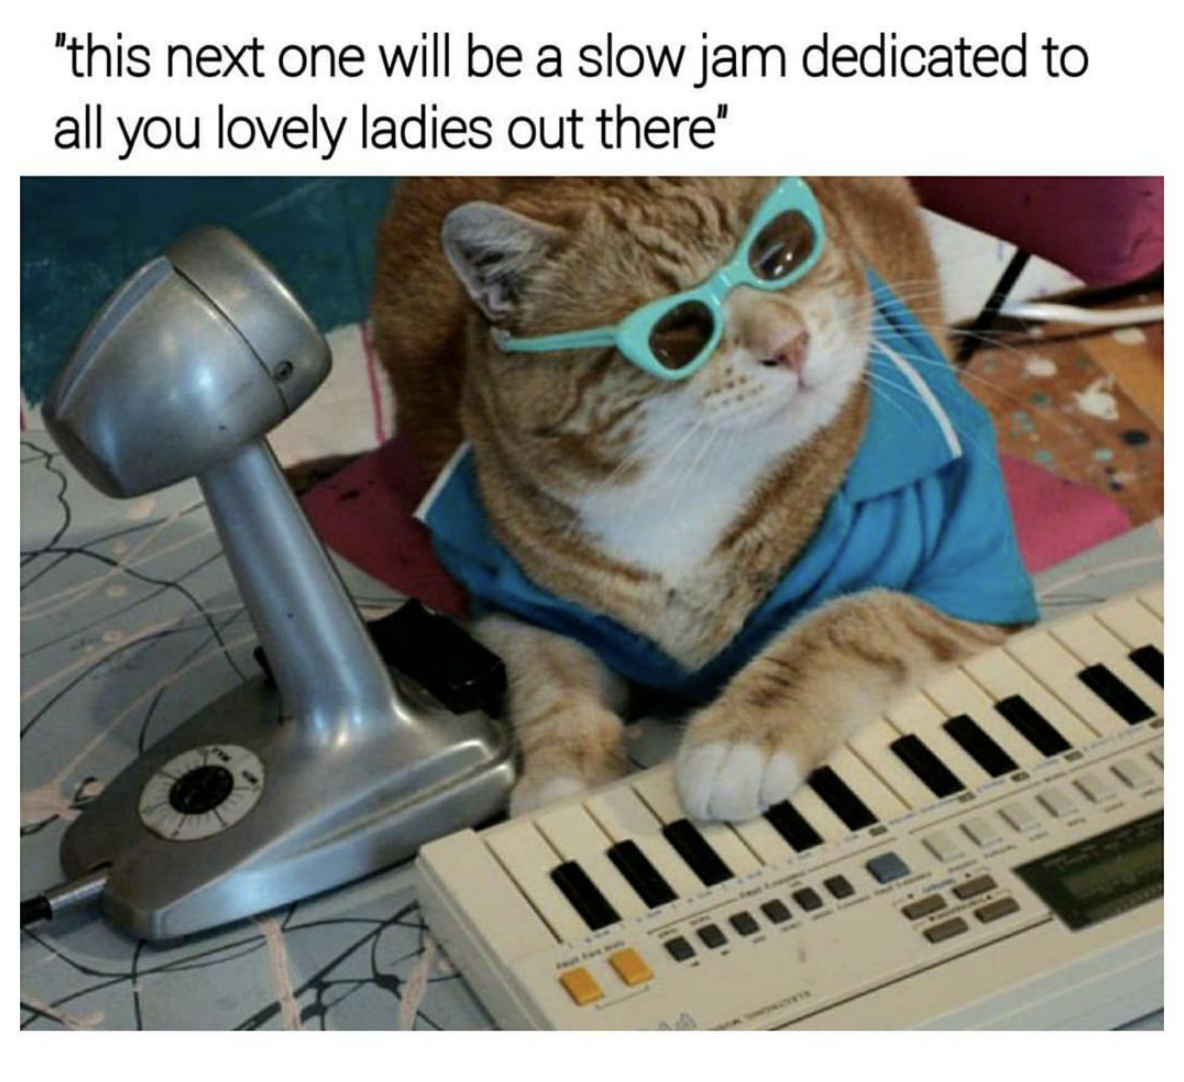 next one's a slow jam - "this next one will be a slow jam dedicated to all you lovely ladies out there'